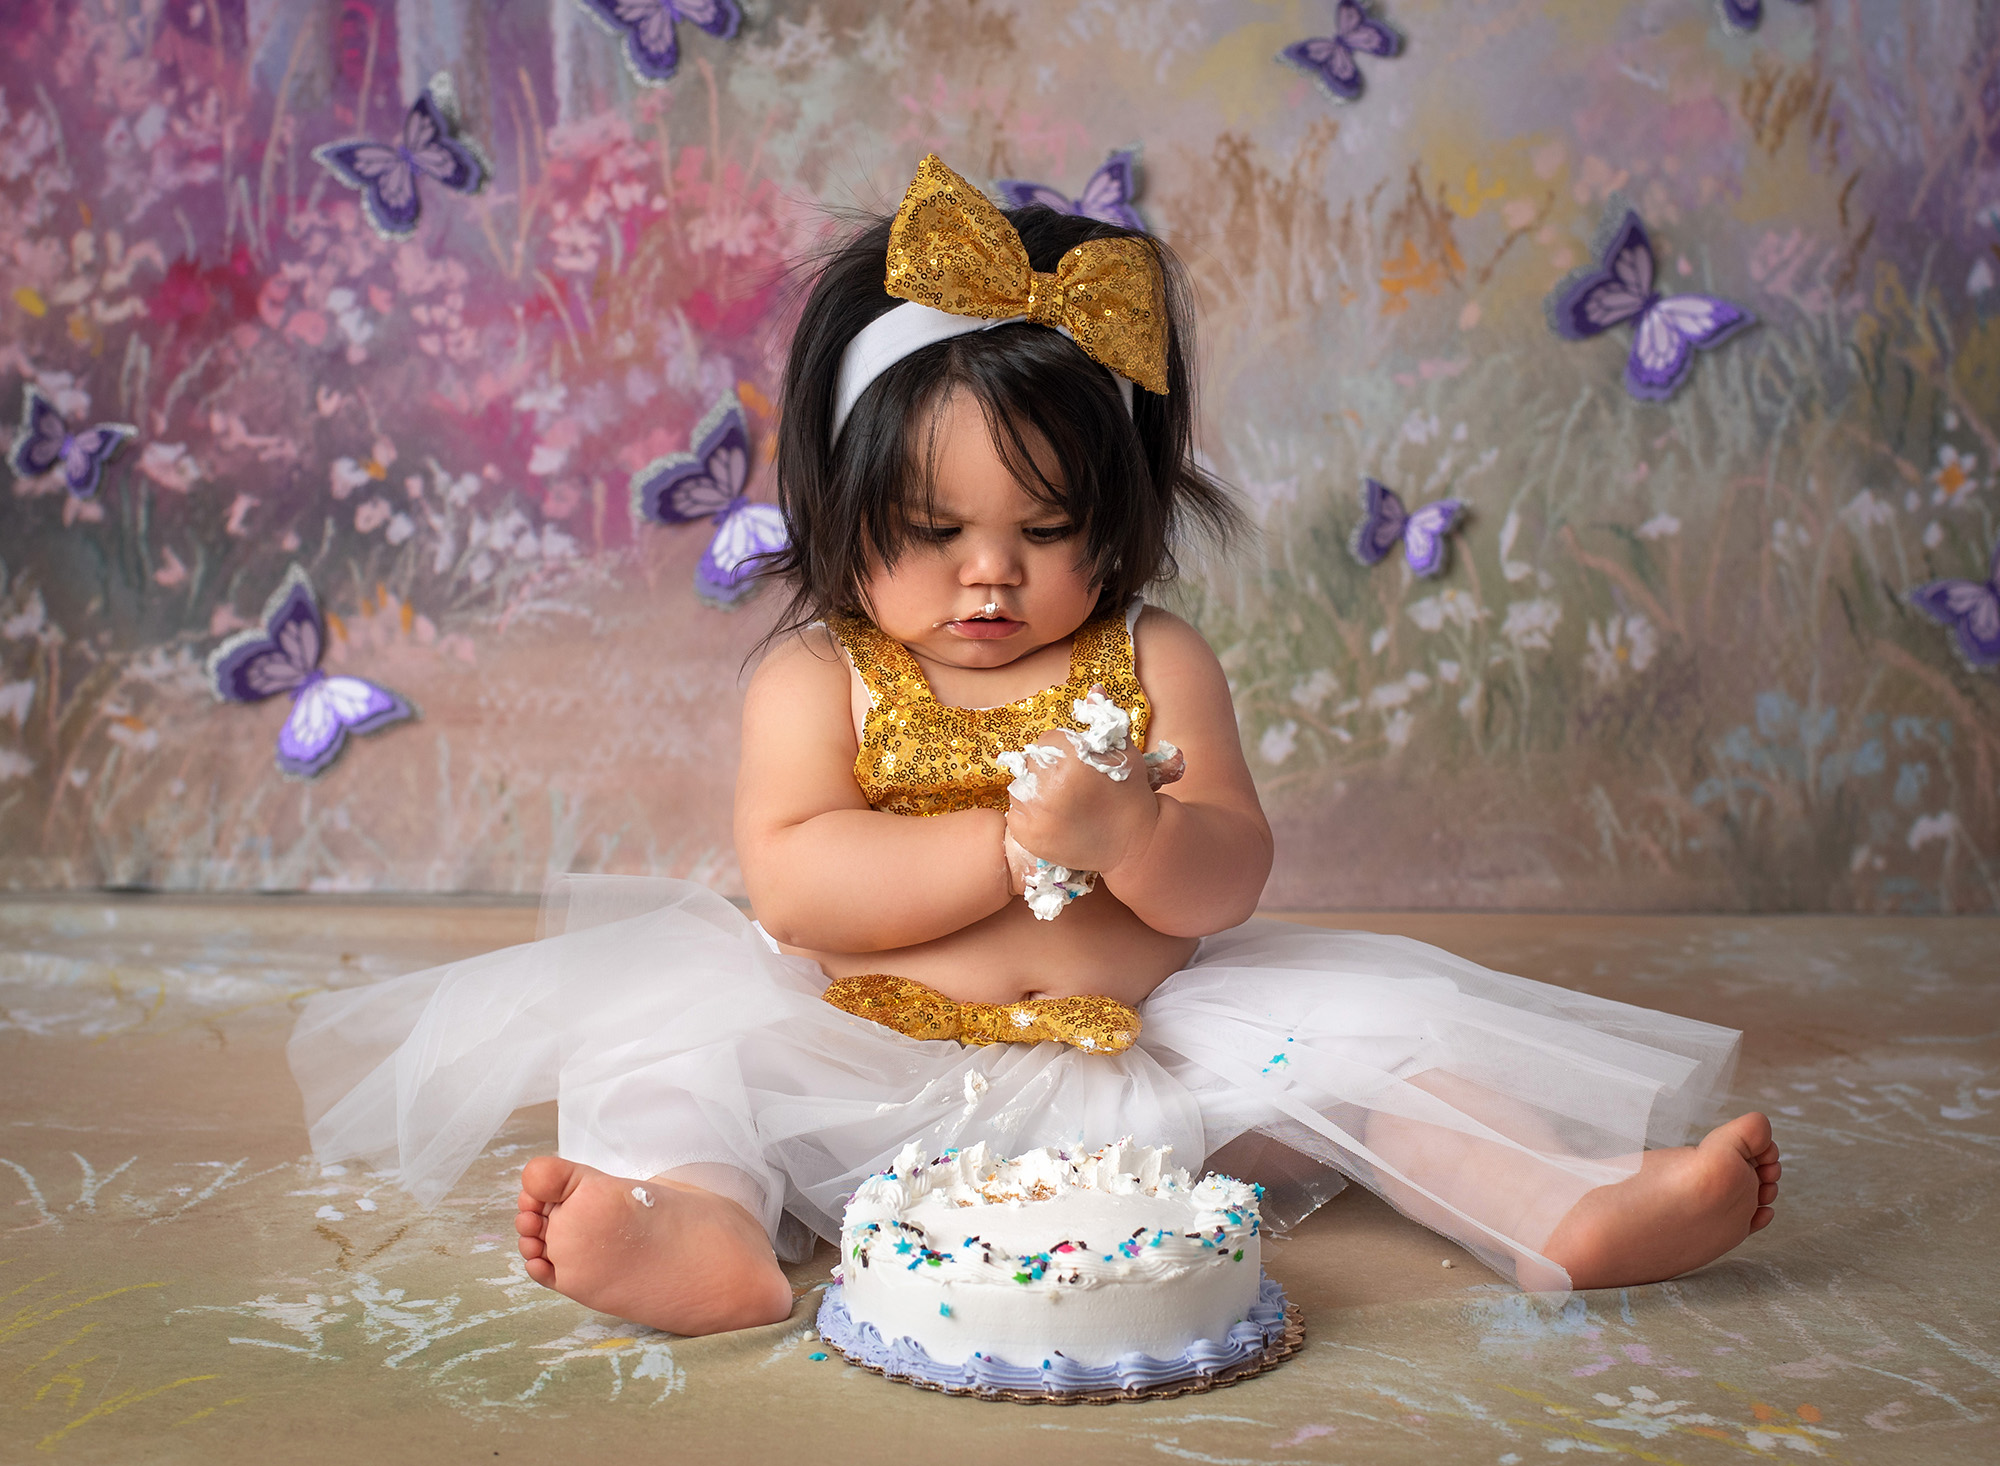 Butterfly Cake Smash Pictures one year old girl rubbing cake in hands with butterfly background